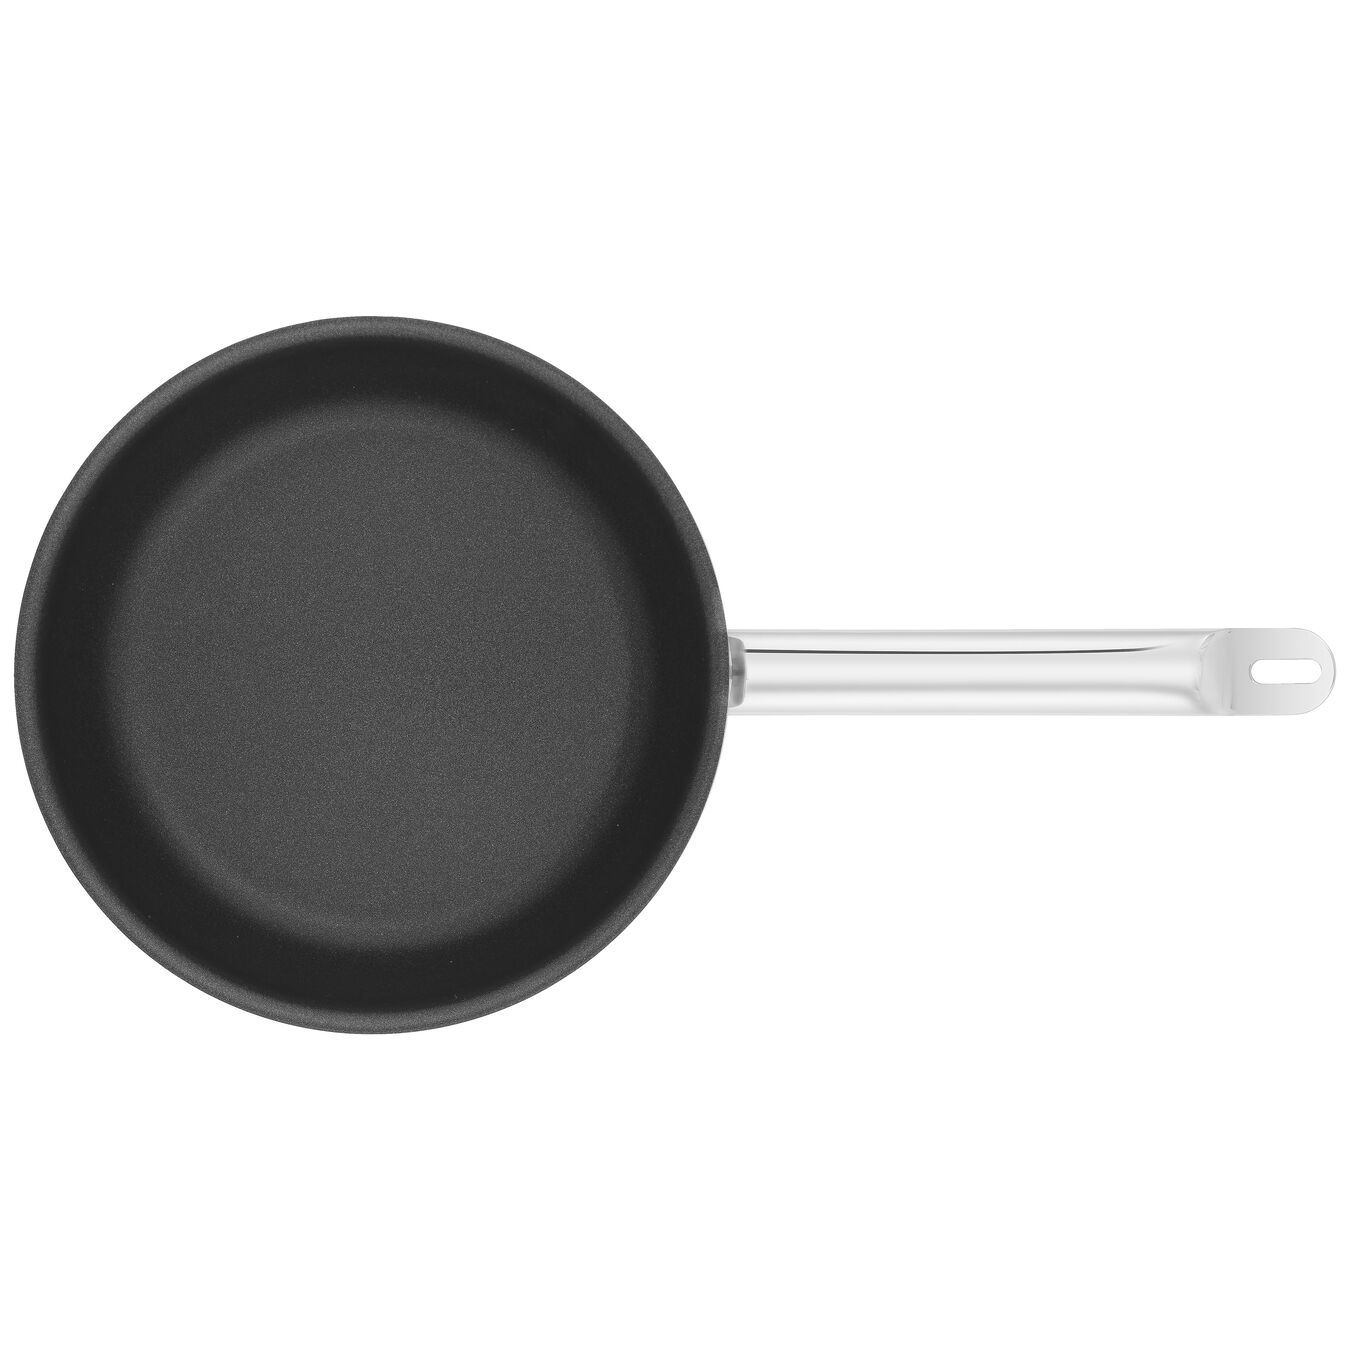 28 cm / 11 inch 18/10 Stainless Steel Frying pan,,large 4